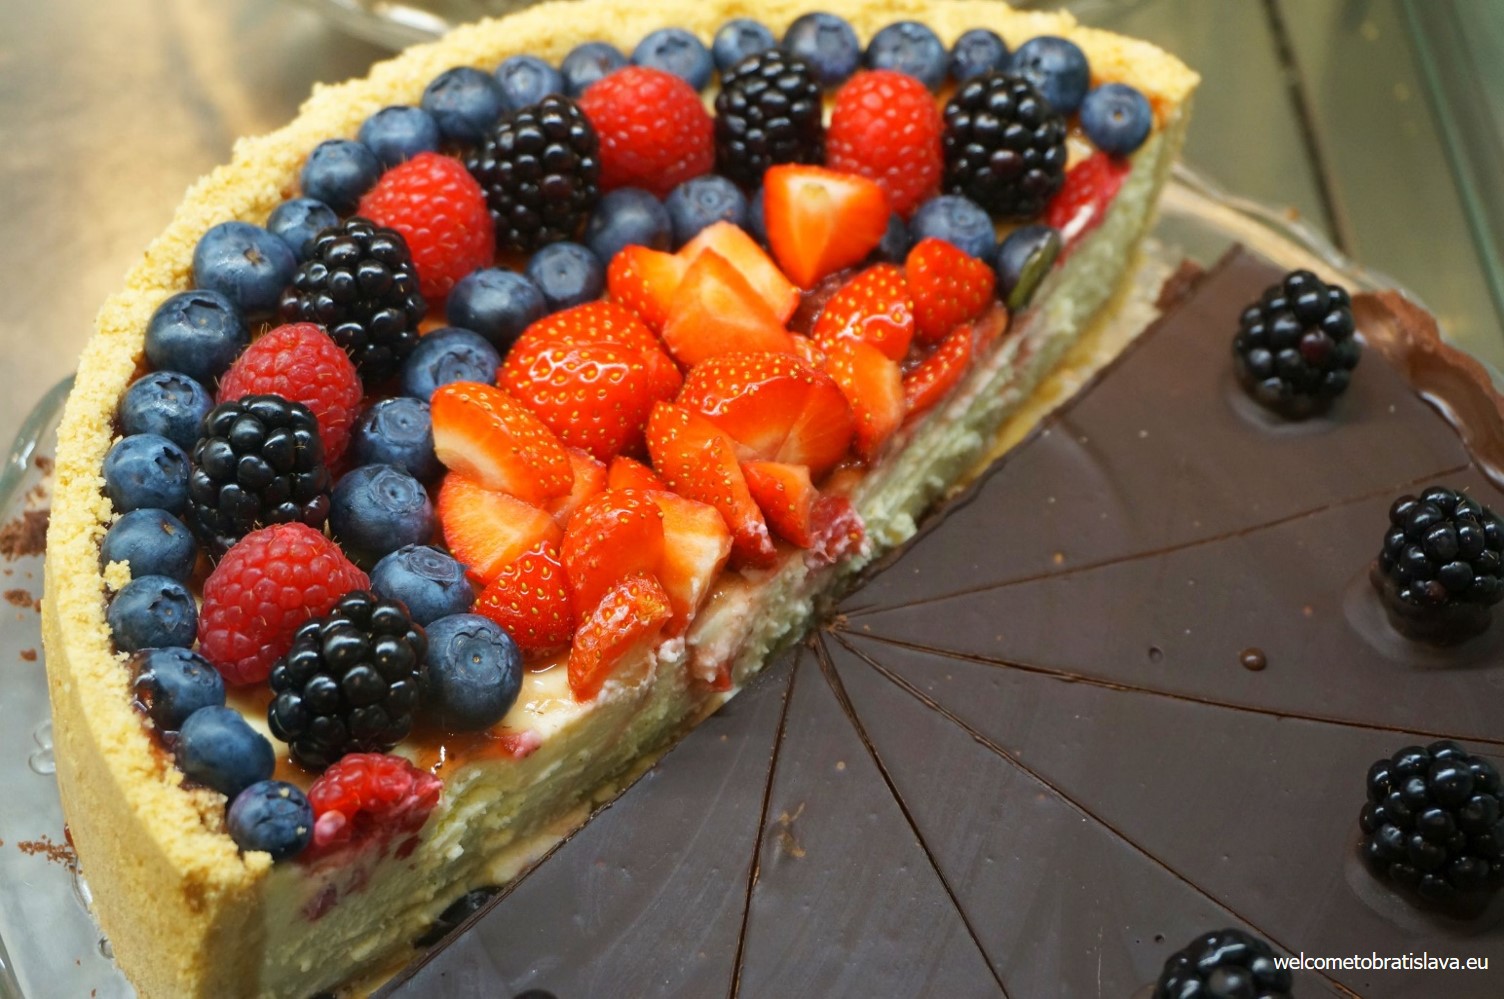 They serve cakes from a favourite raw cake producer PurePure which are both delicious and pretty to look at. 